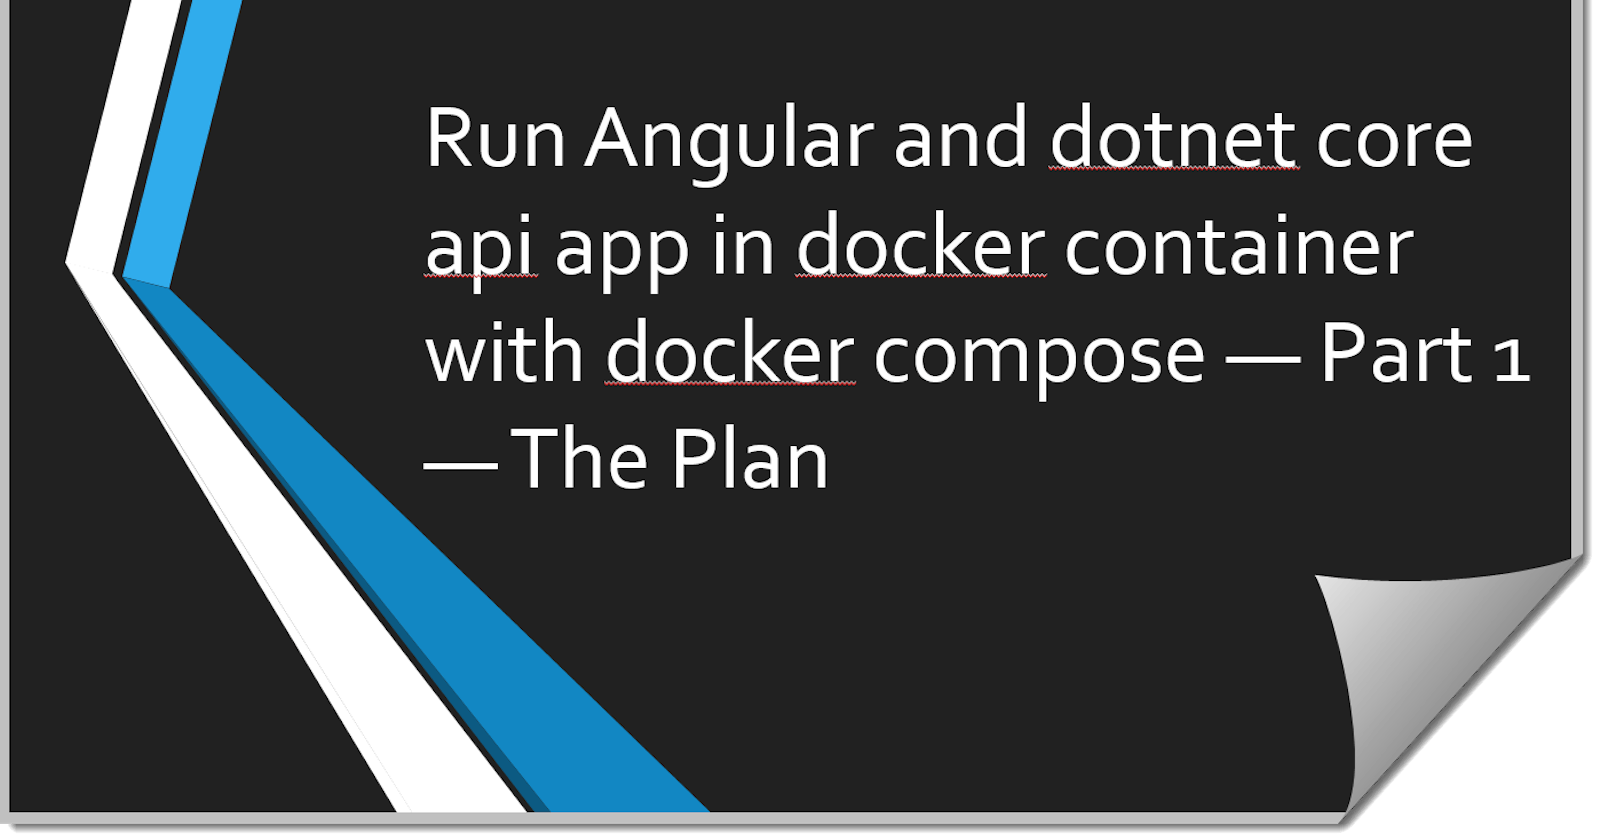 Run Angular and dotnet core api app in docker container with docker compose — Part 1 — The Plan